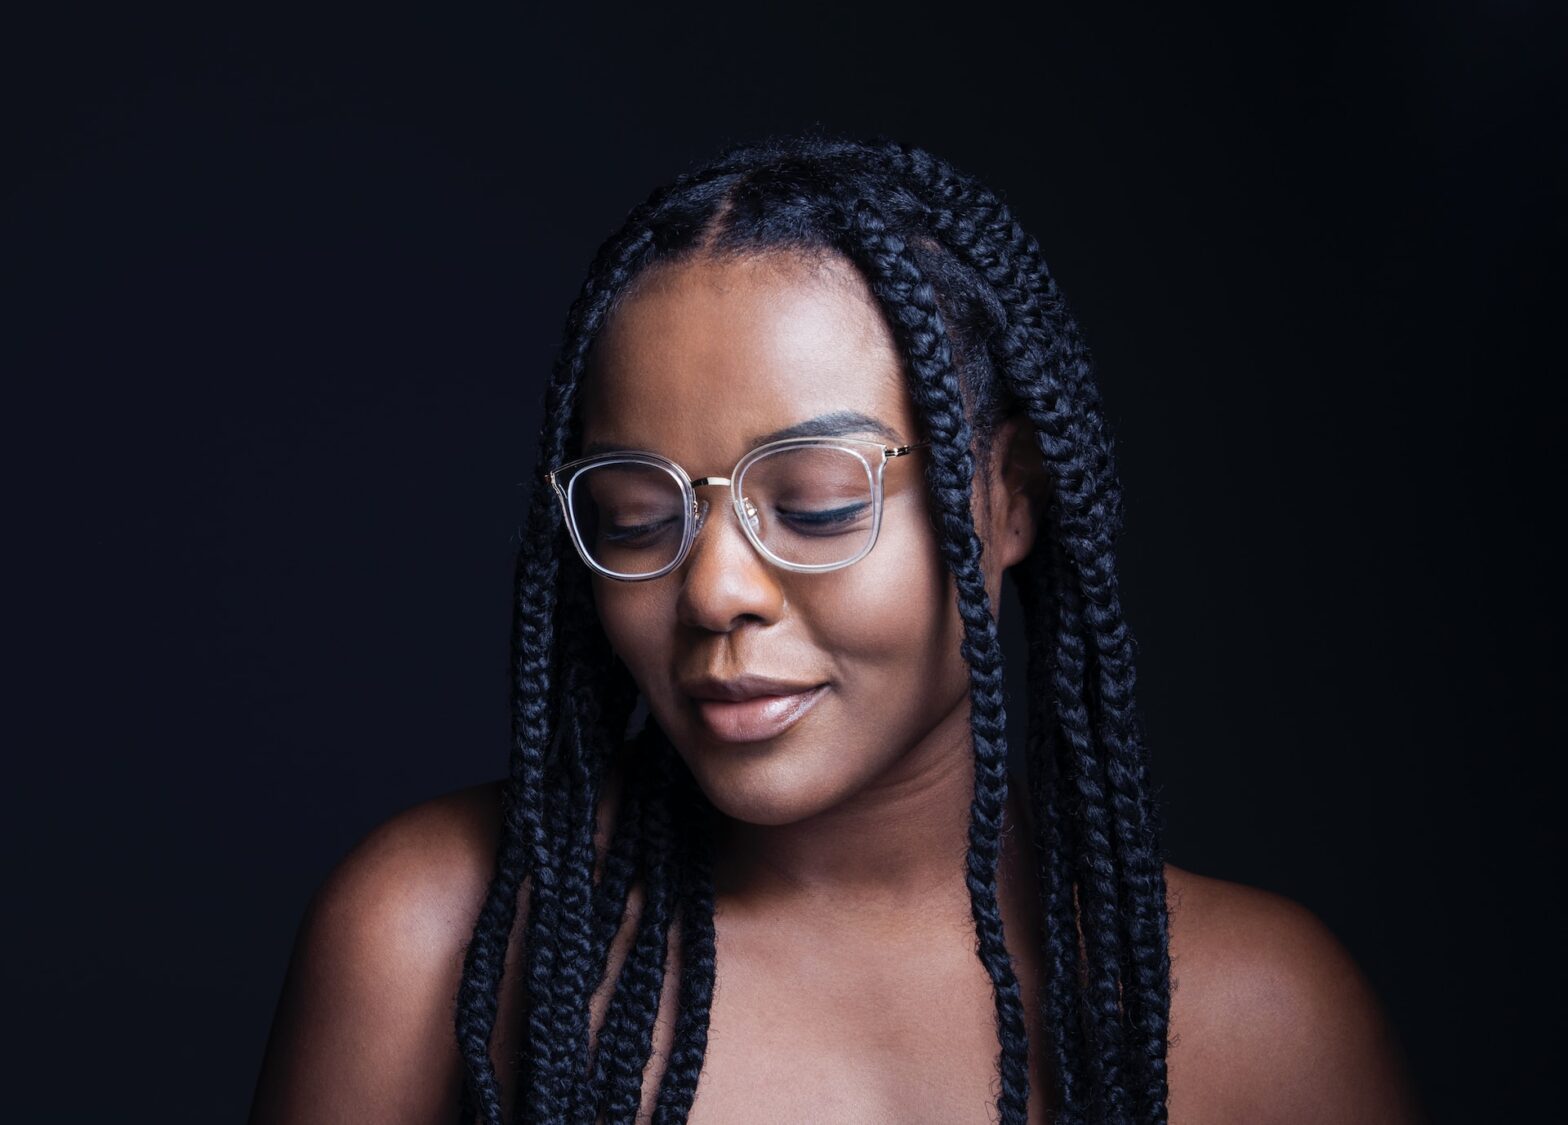 A women with braids and glasses looking down